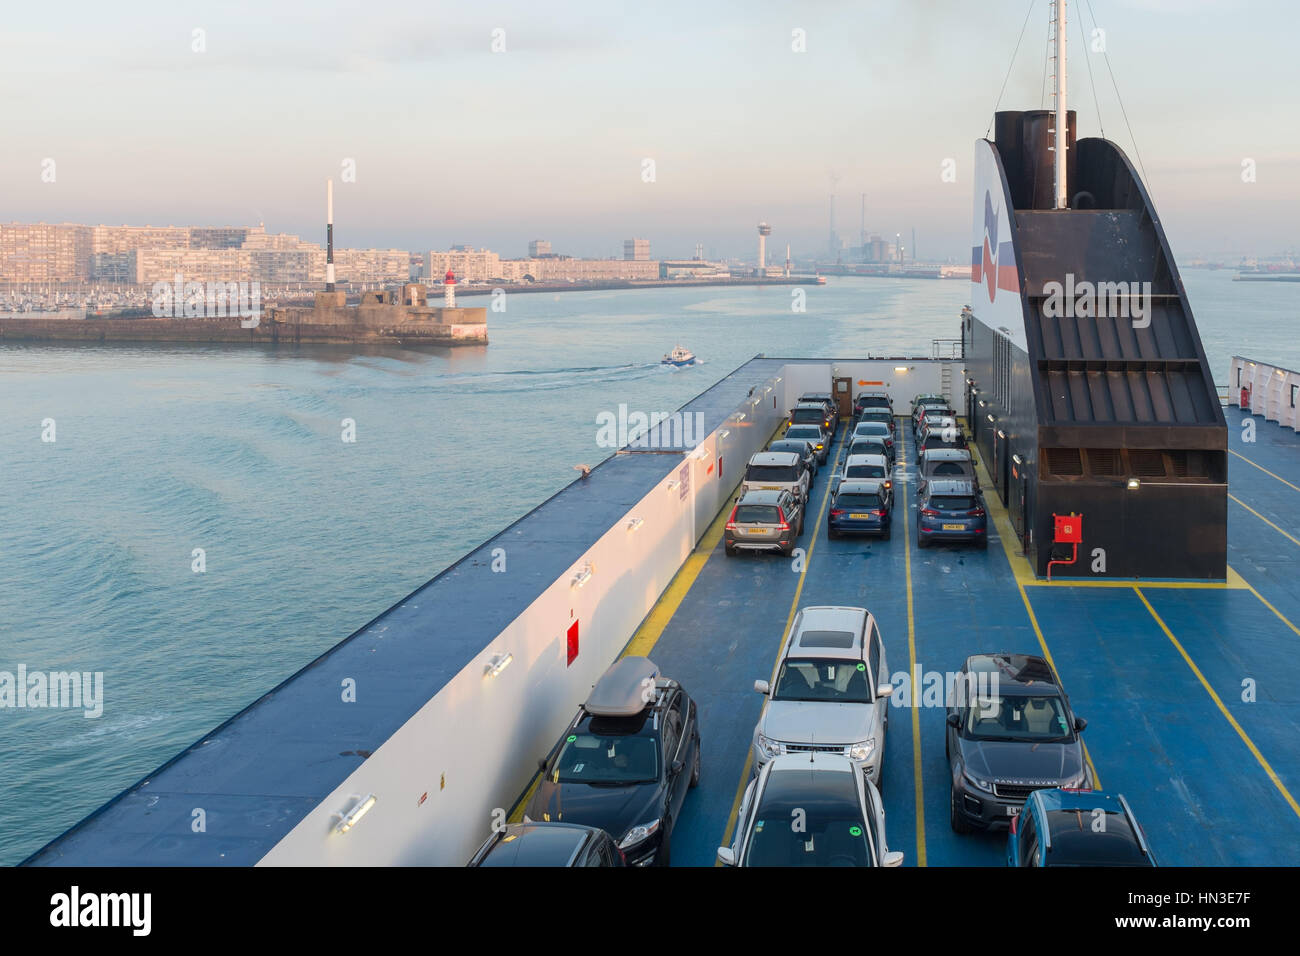 The port of Le Havre viewed from the deck of a departing Brittany Ferries car ferry Stock Photo